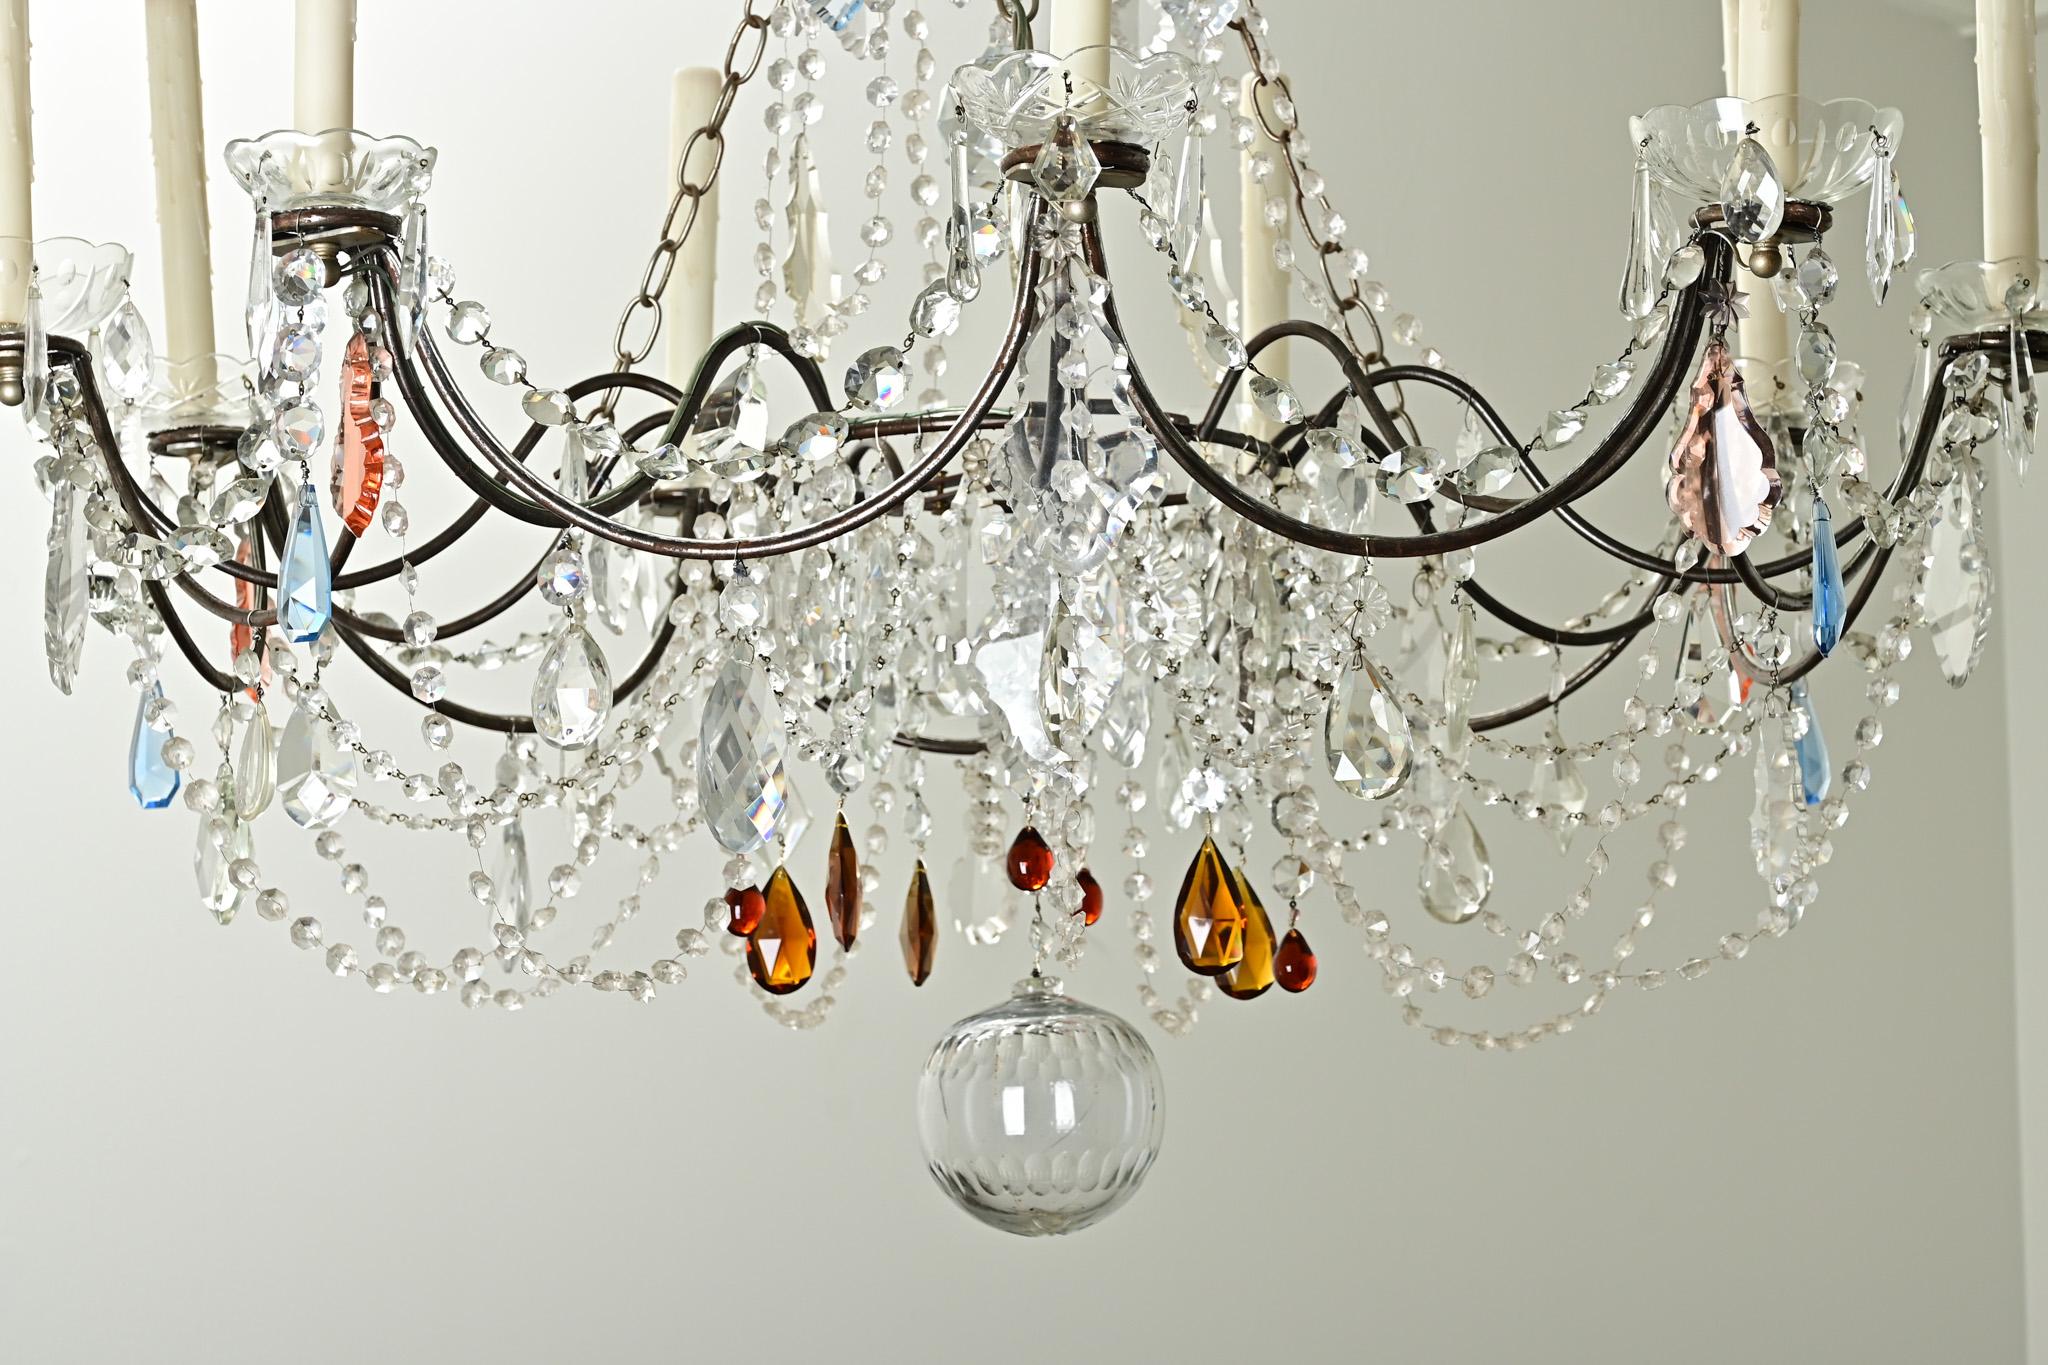 Large European Crystal Chandelier In Good Condition For Sale In Baton Rouge, LA